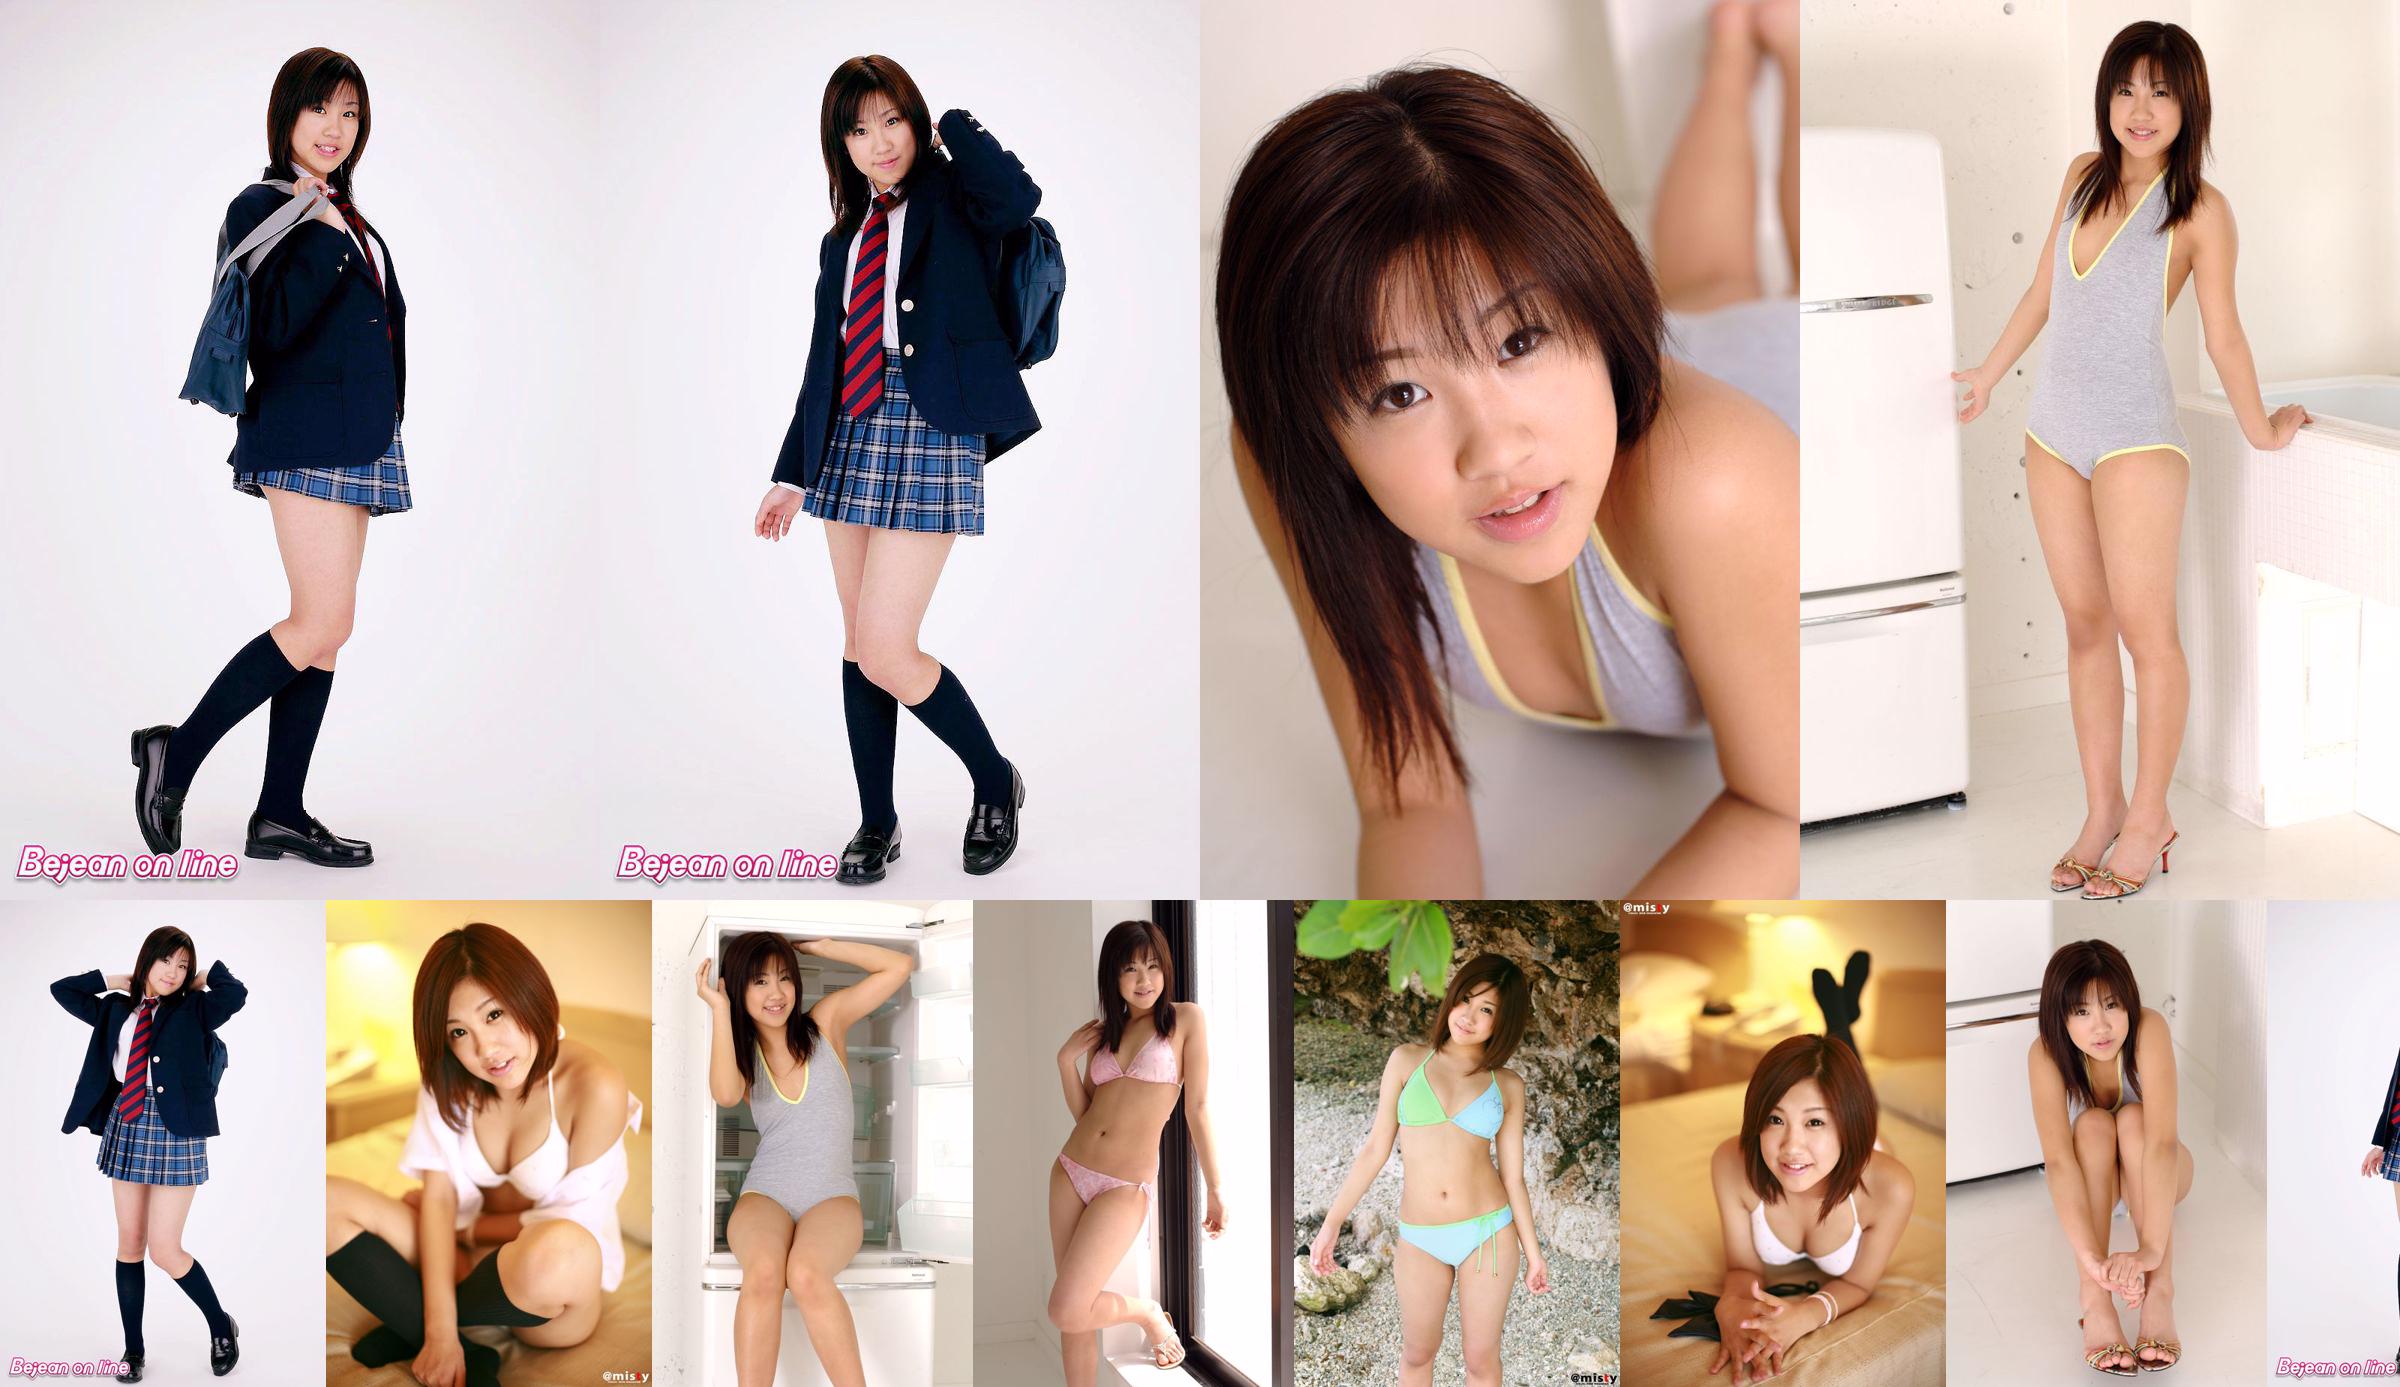 Private Bejean Girls’ School Maho Nagase 永瀬麻帆 [Bejean On Line] No.ee4e8f Page 3